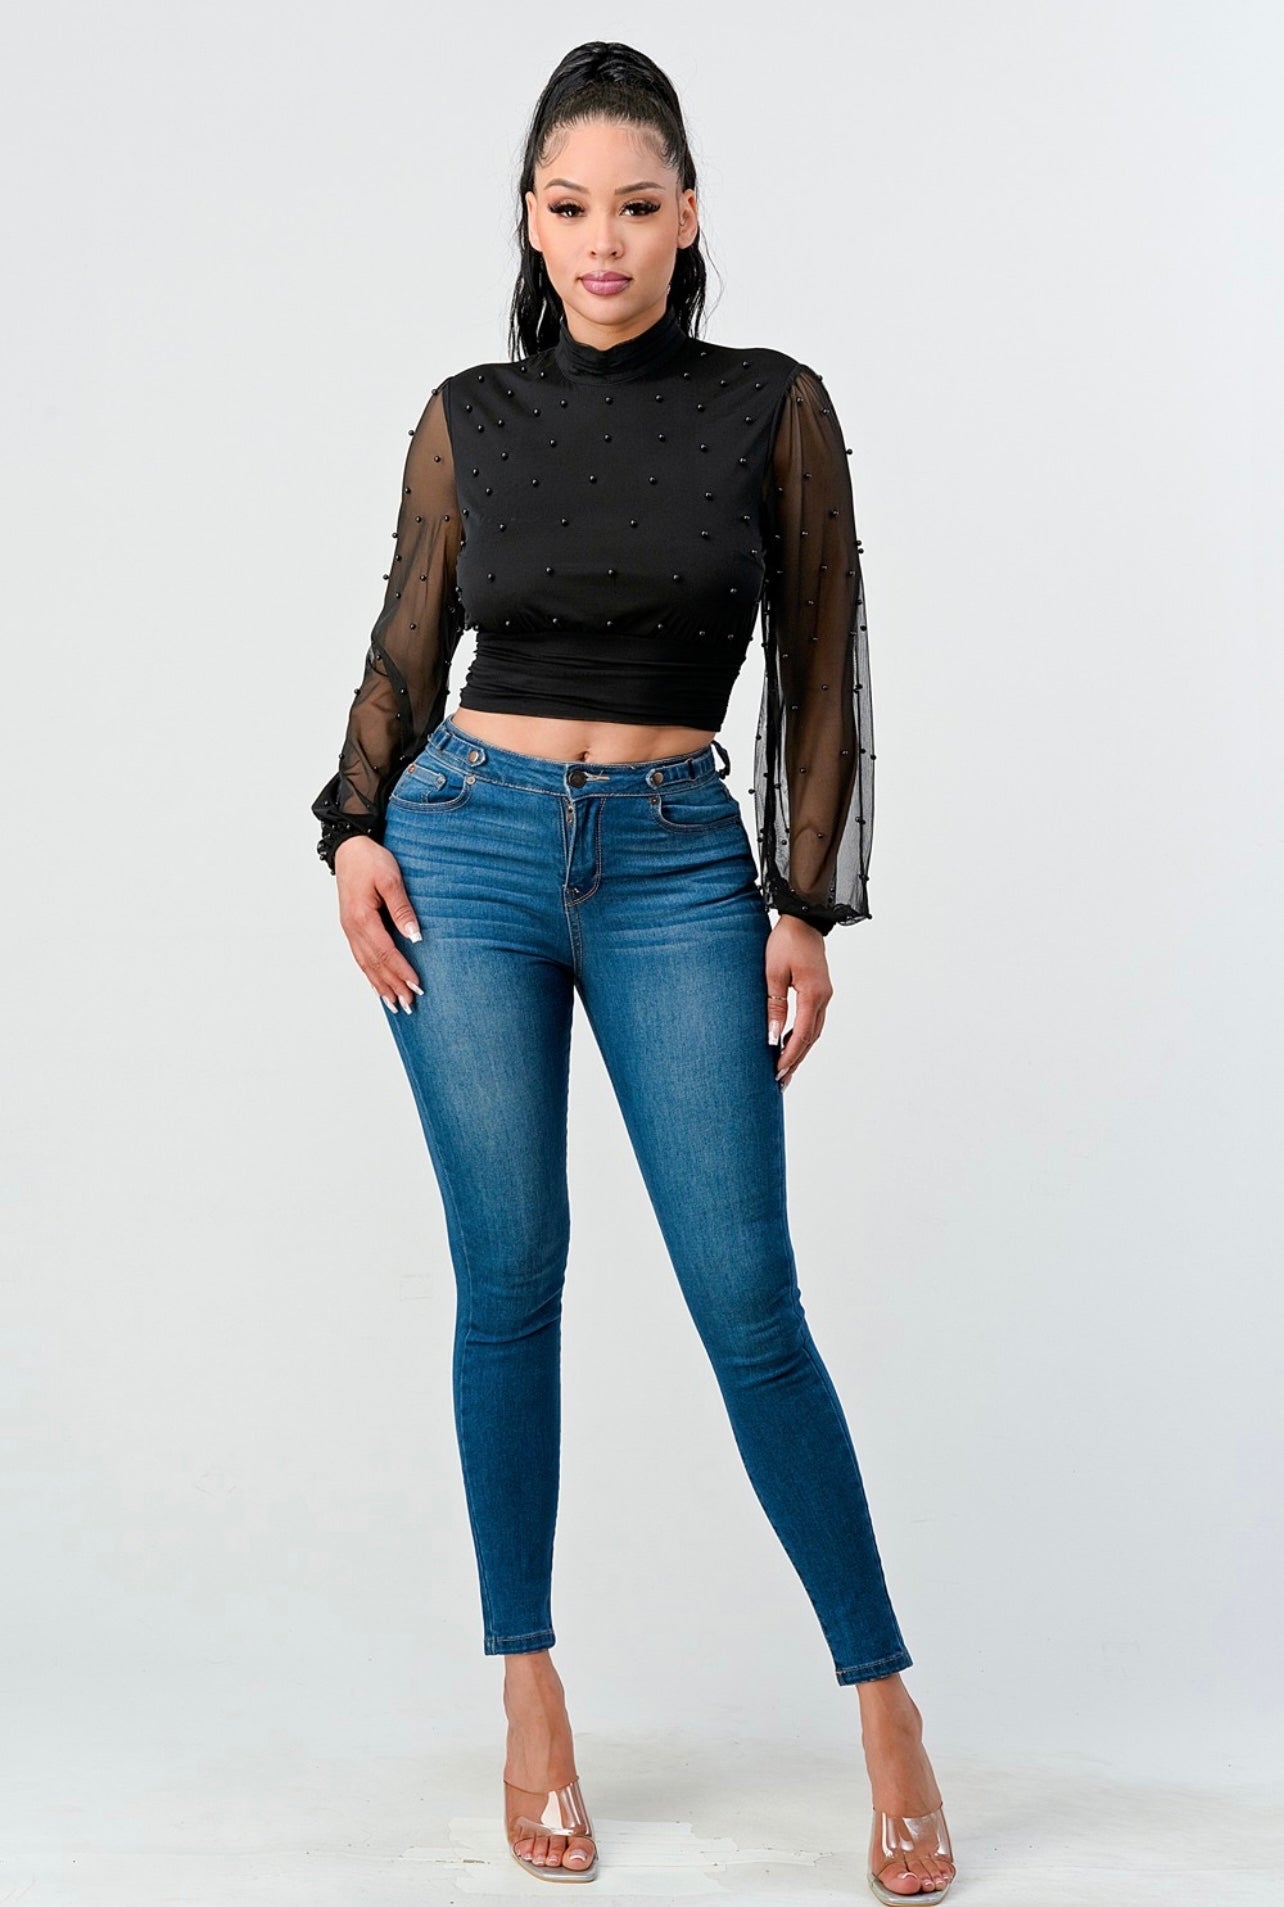 Luxxy Mesh Pearl Cropped Top (Black)